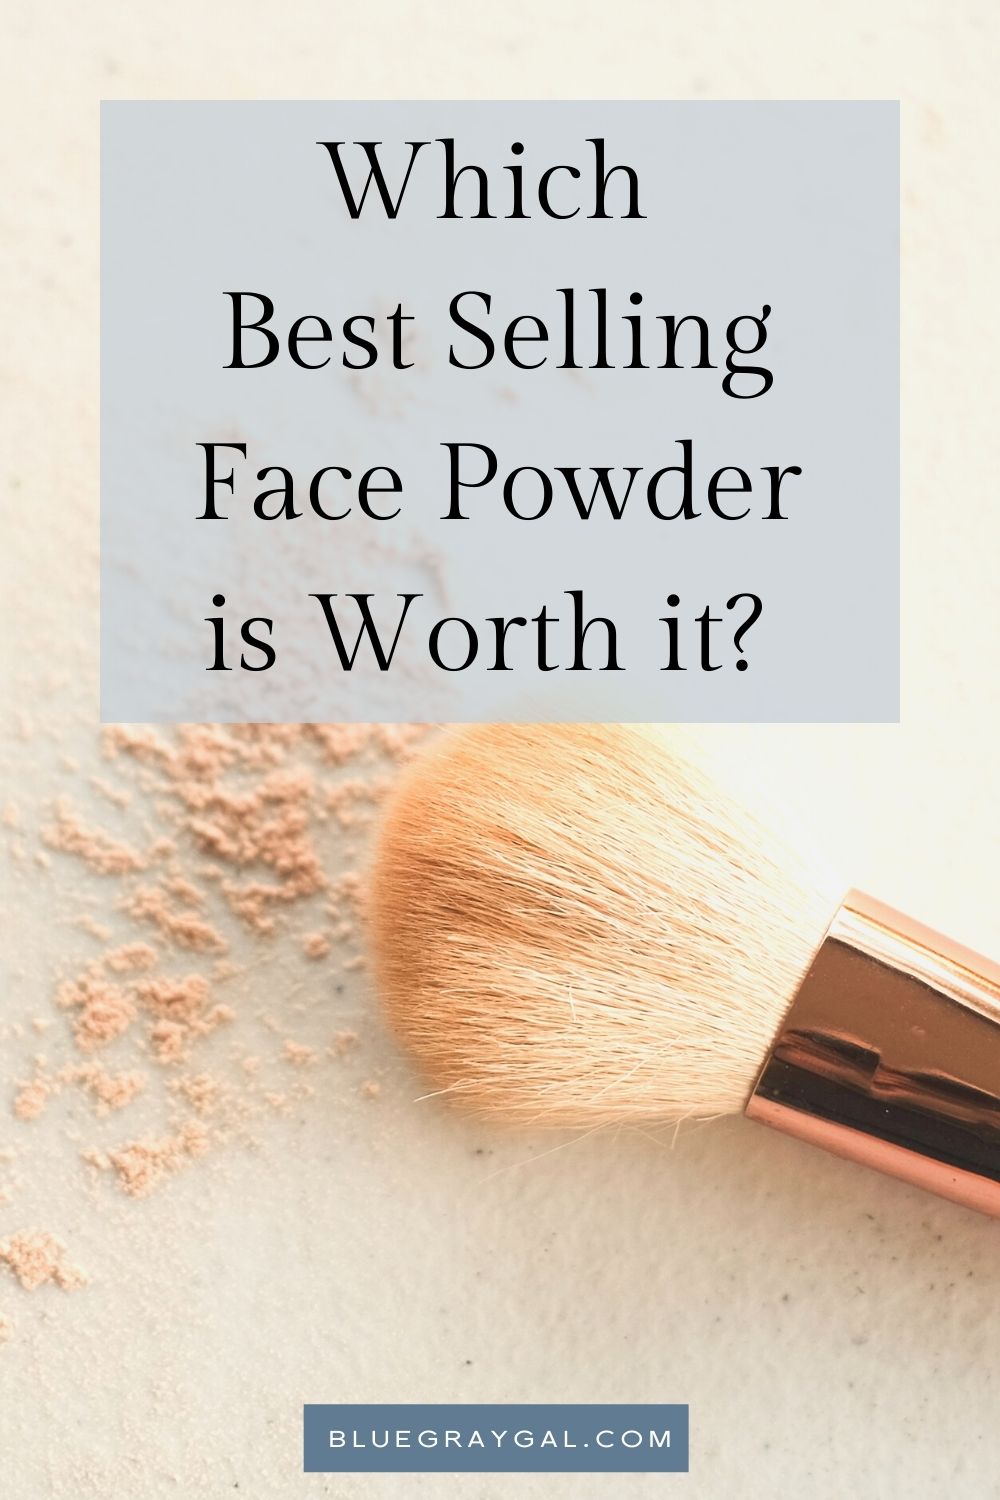 Which face powder is worth buying for dry skin face powder?